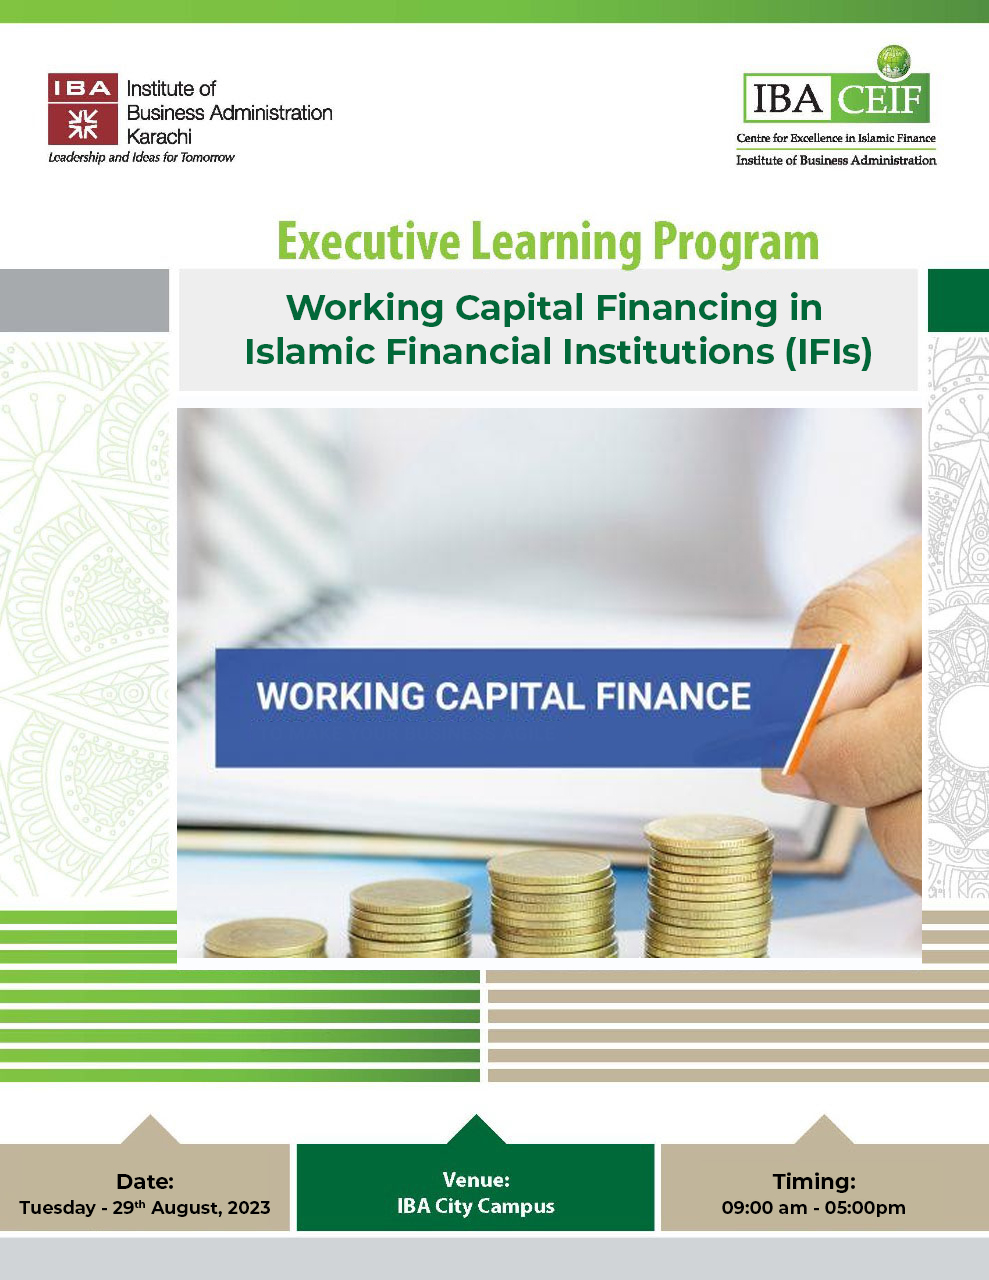 Working Capital Financing in Islamic Financial Institutions (IFIs)